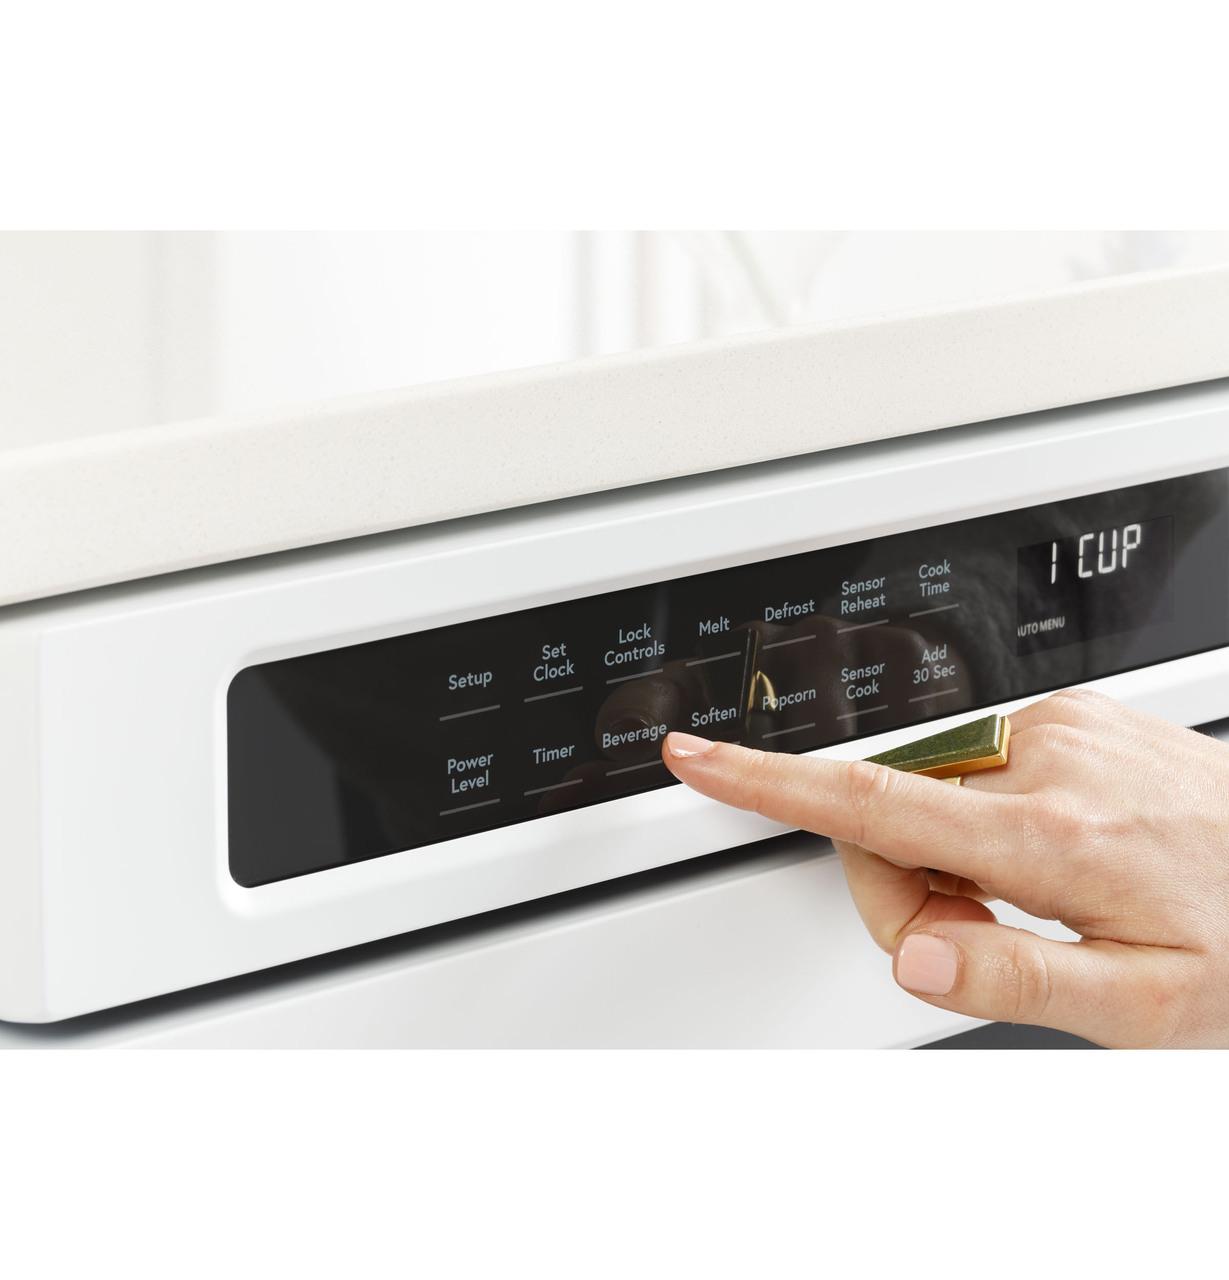 MICROWAVE ACCESSORIES : ACCESSORIES - 27 BUILT IN MICROWAVE - Blog.hr